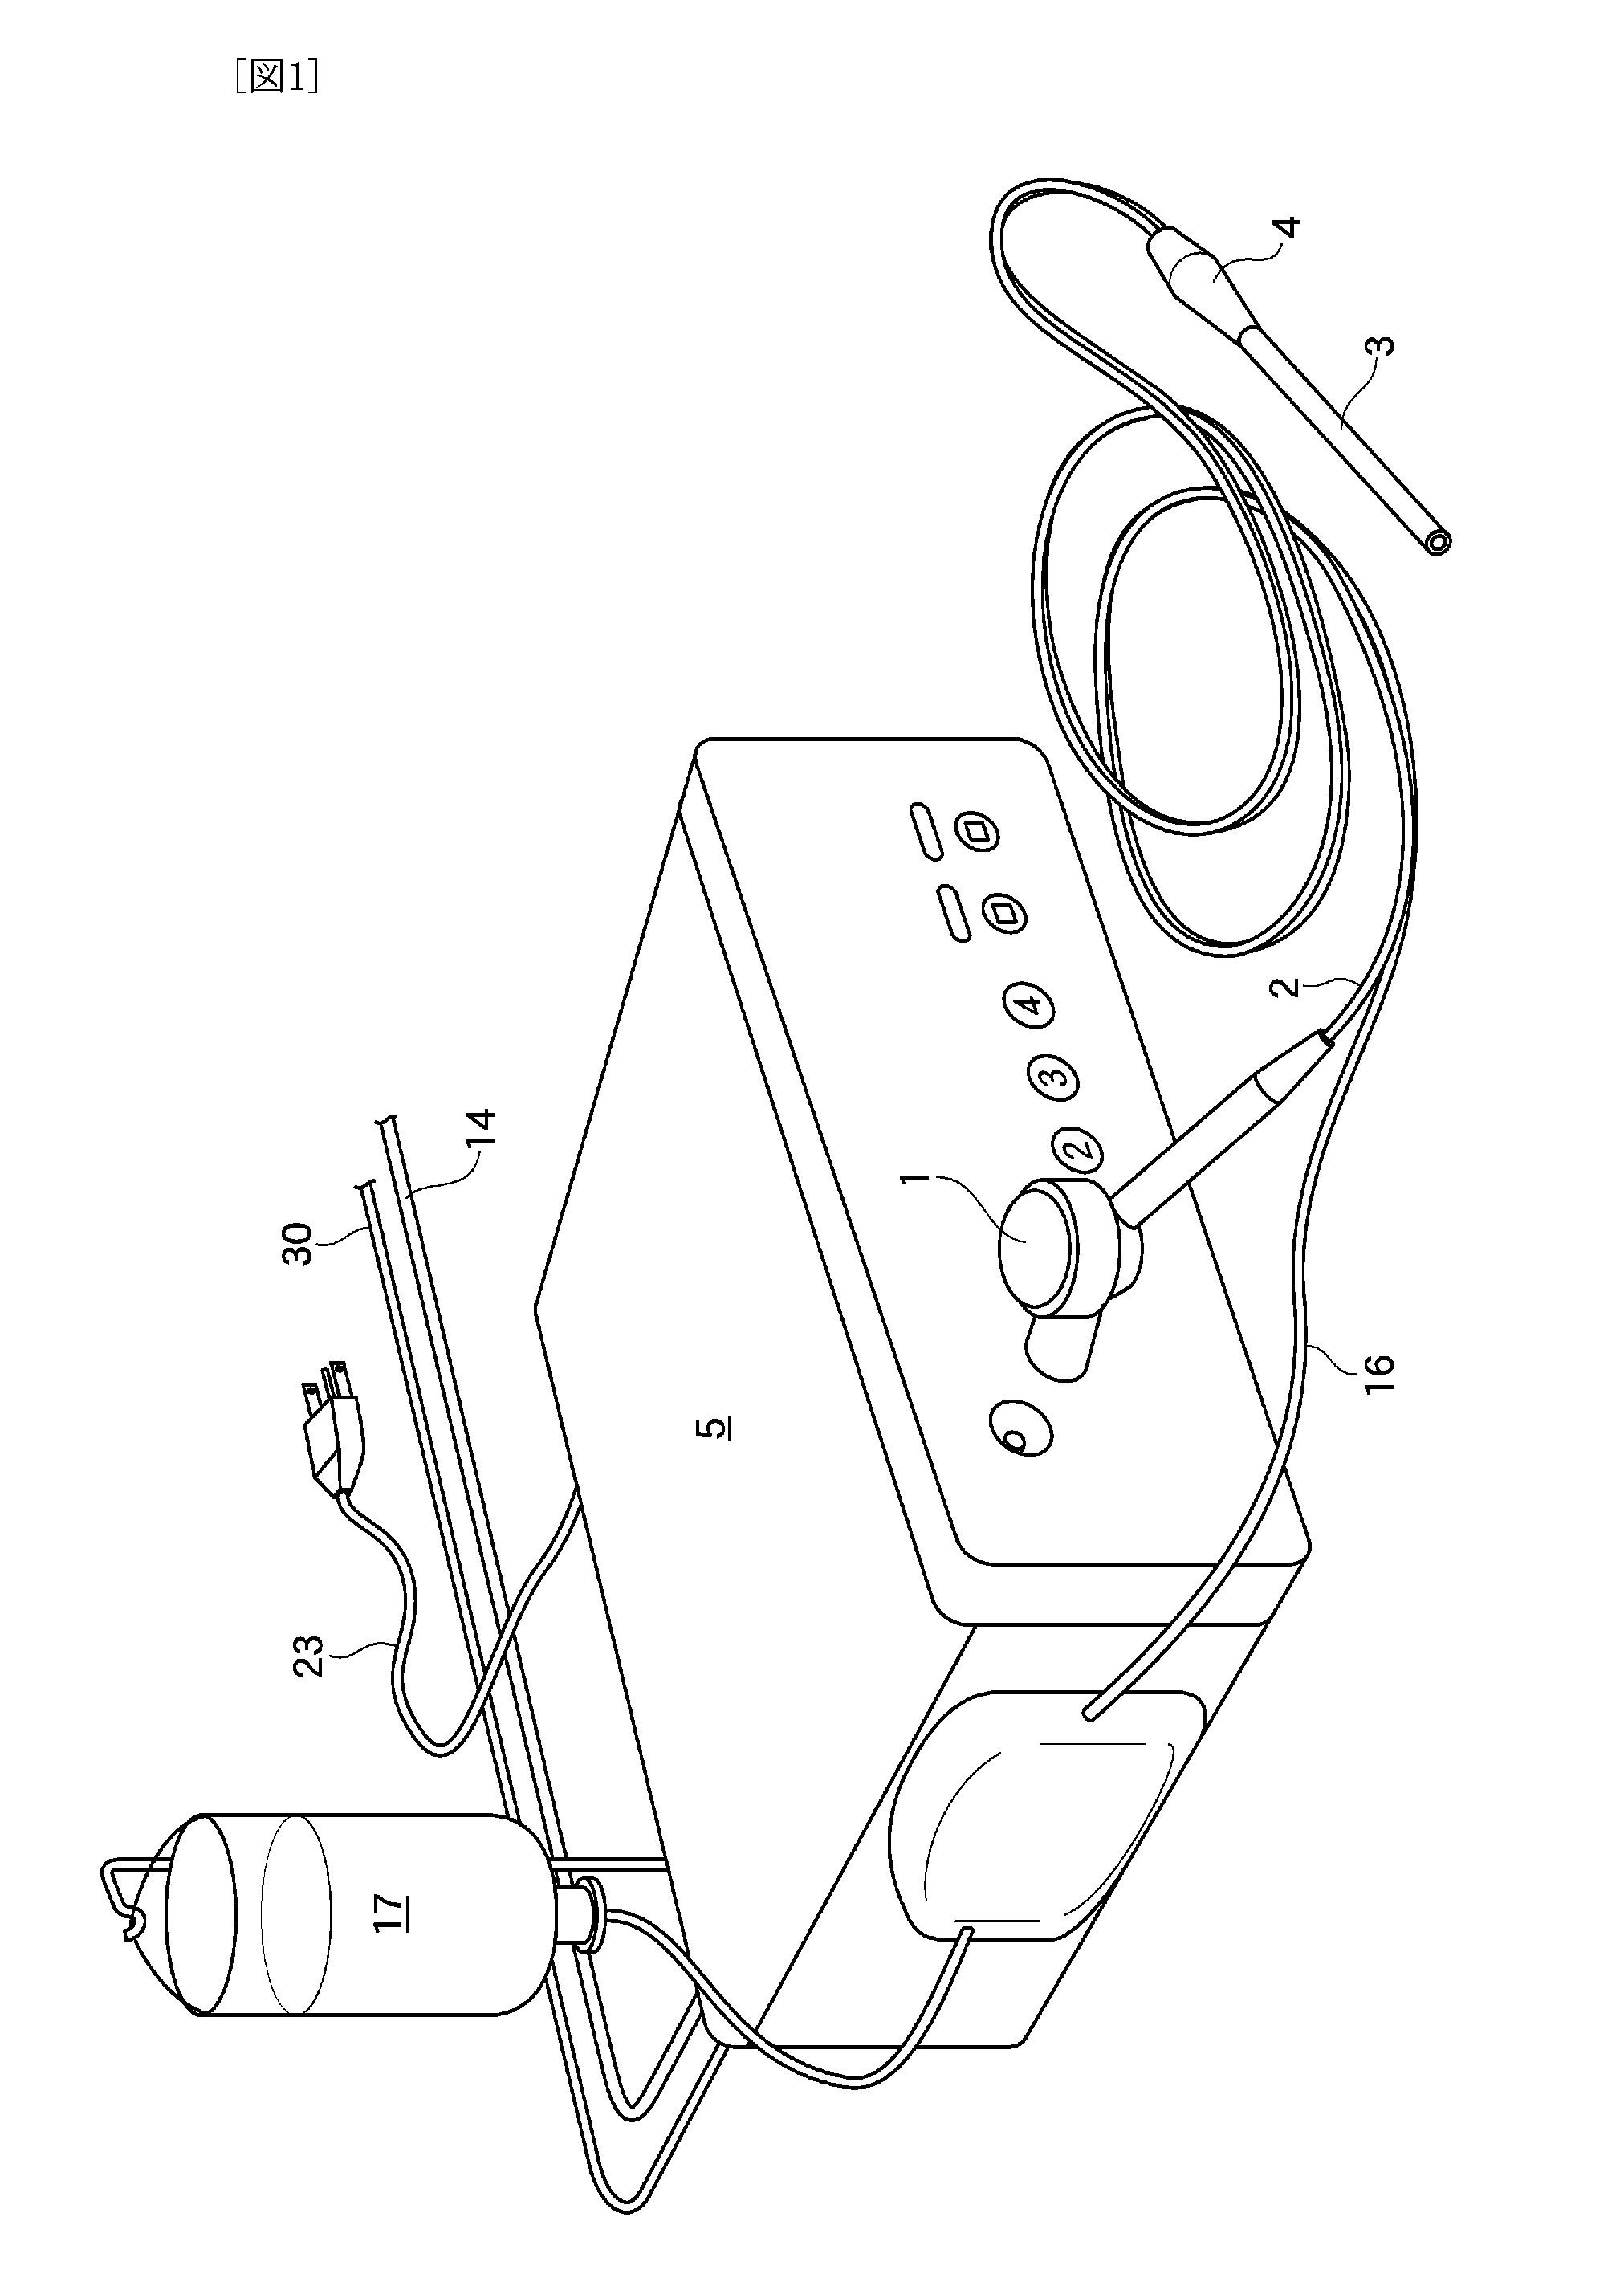 Apparatus for Hemostasis and Adhesion Prevention for Use in Endoscopic Surgery